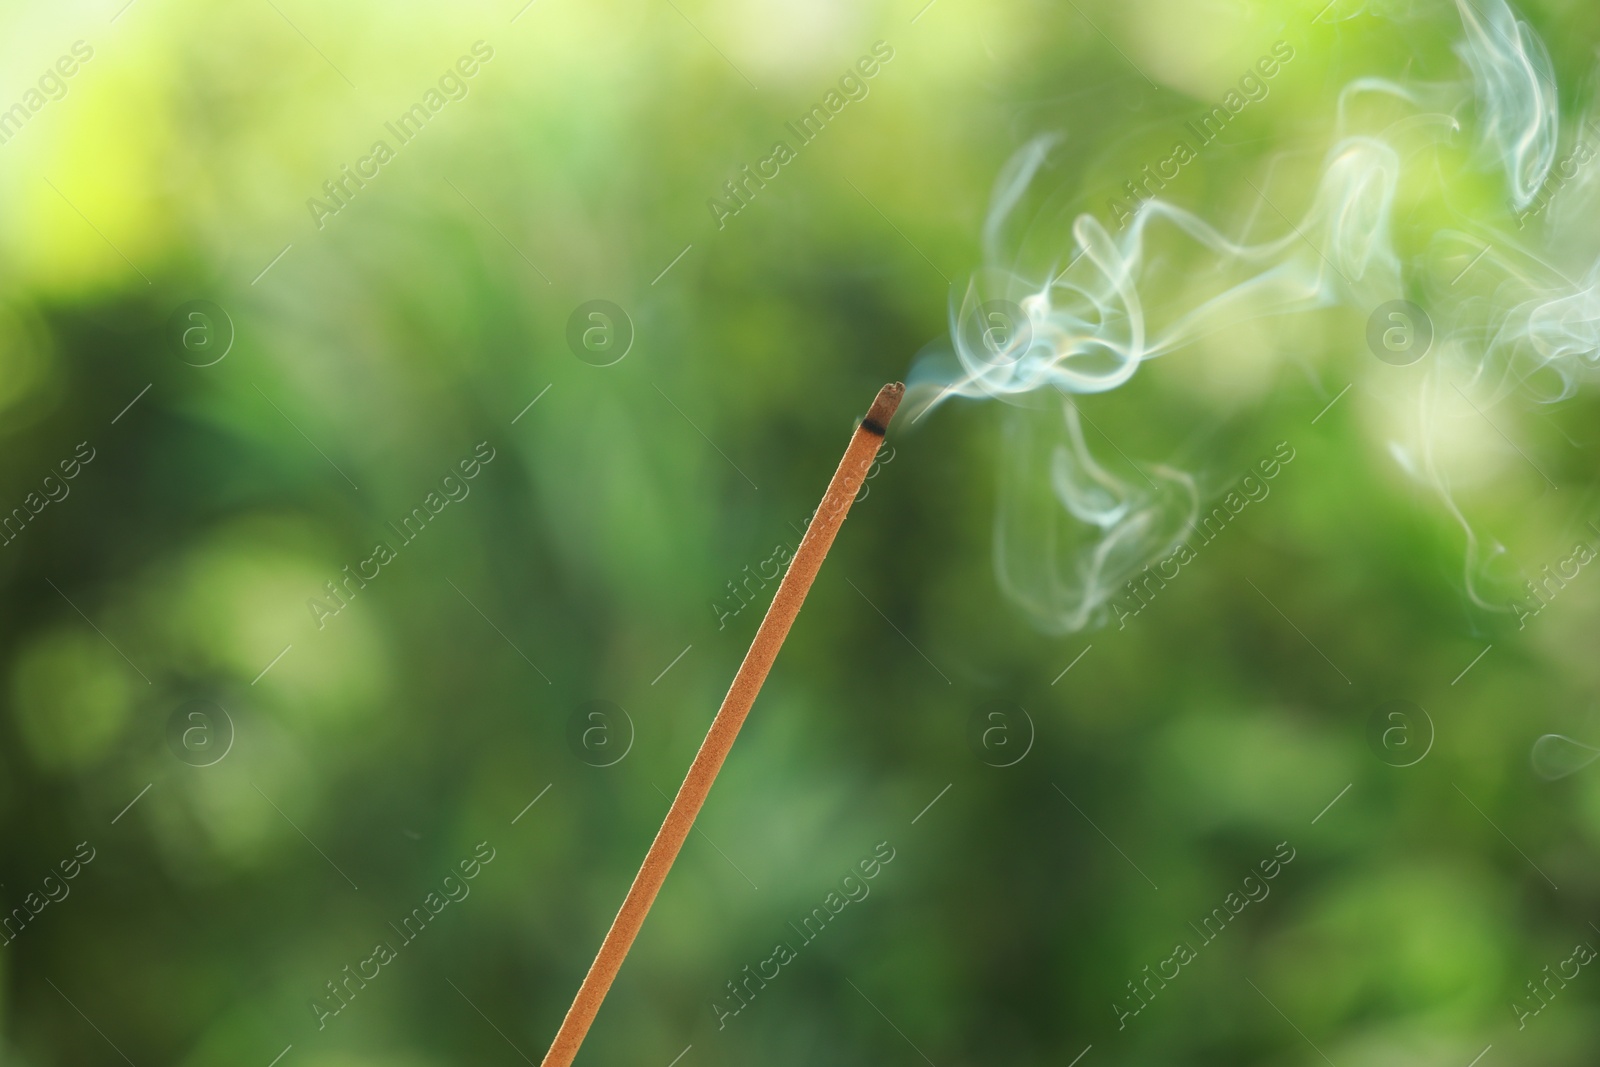 Photo of Incense stick smoldering on green blurred background